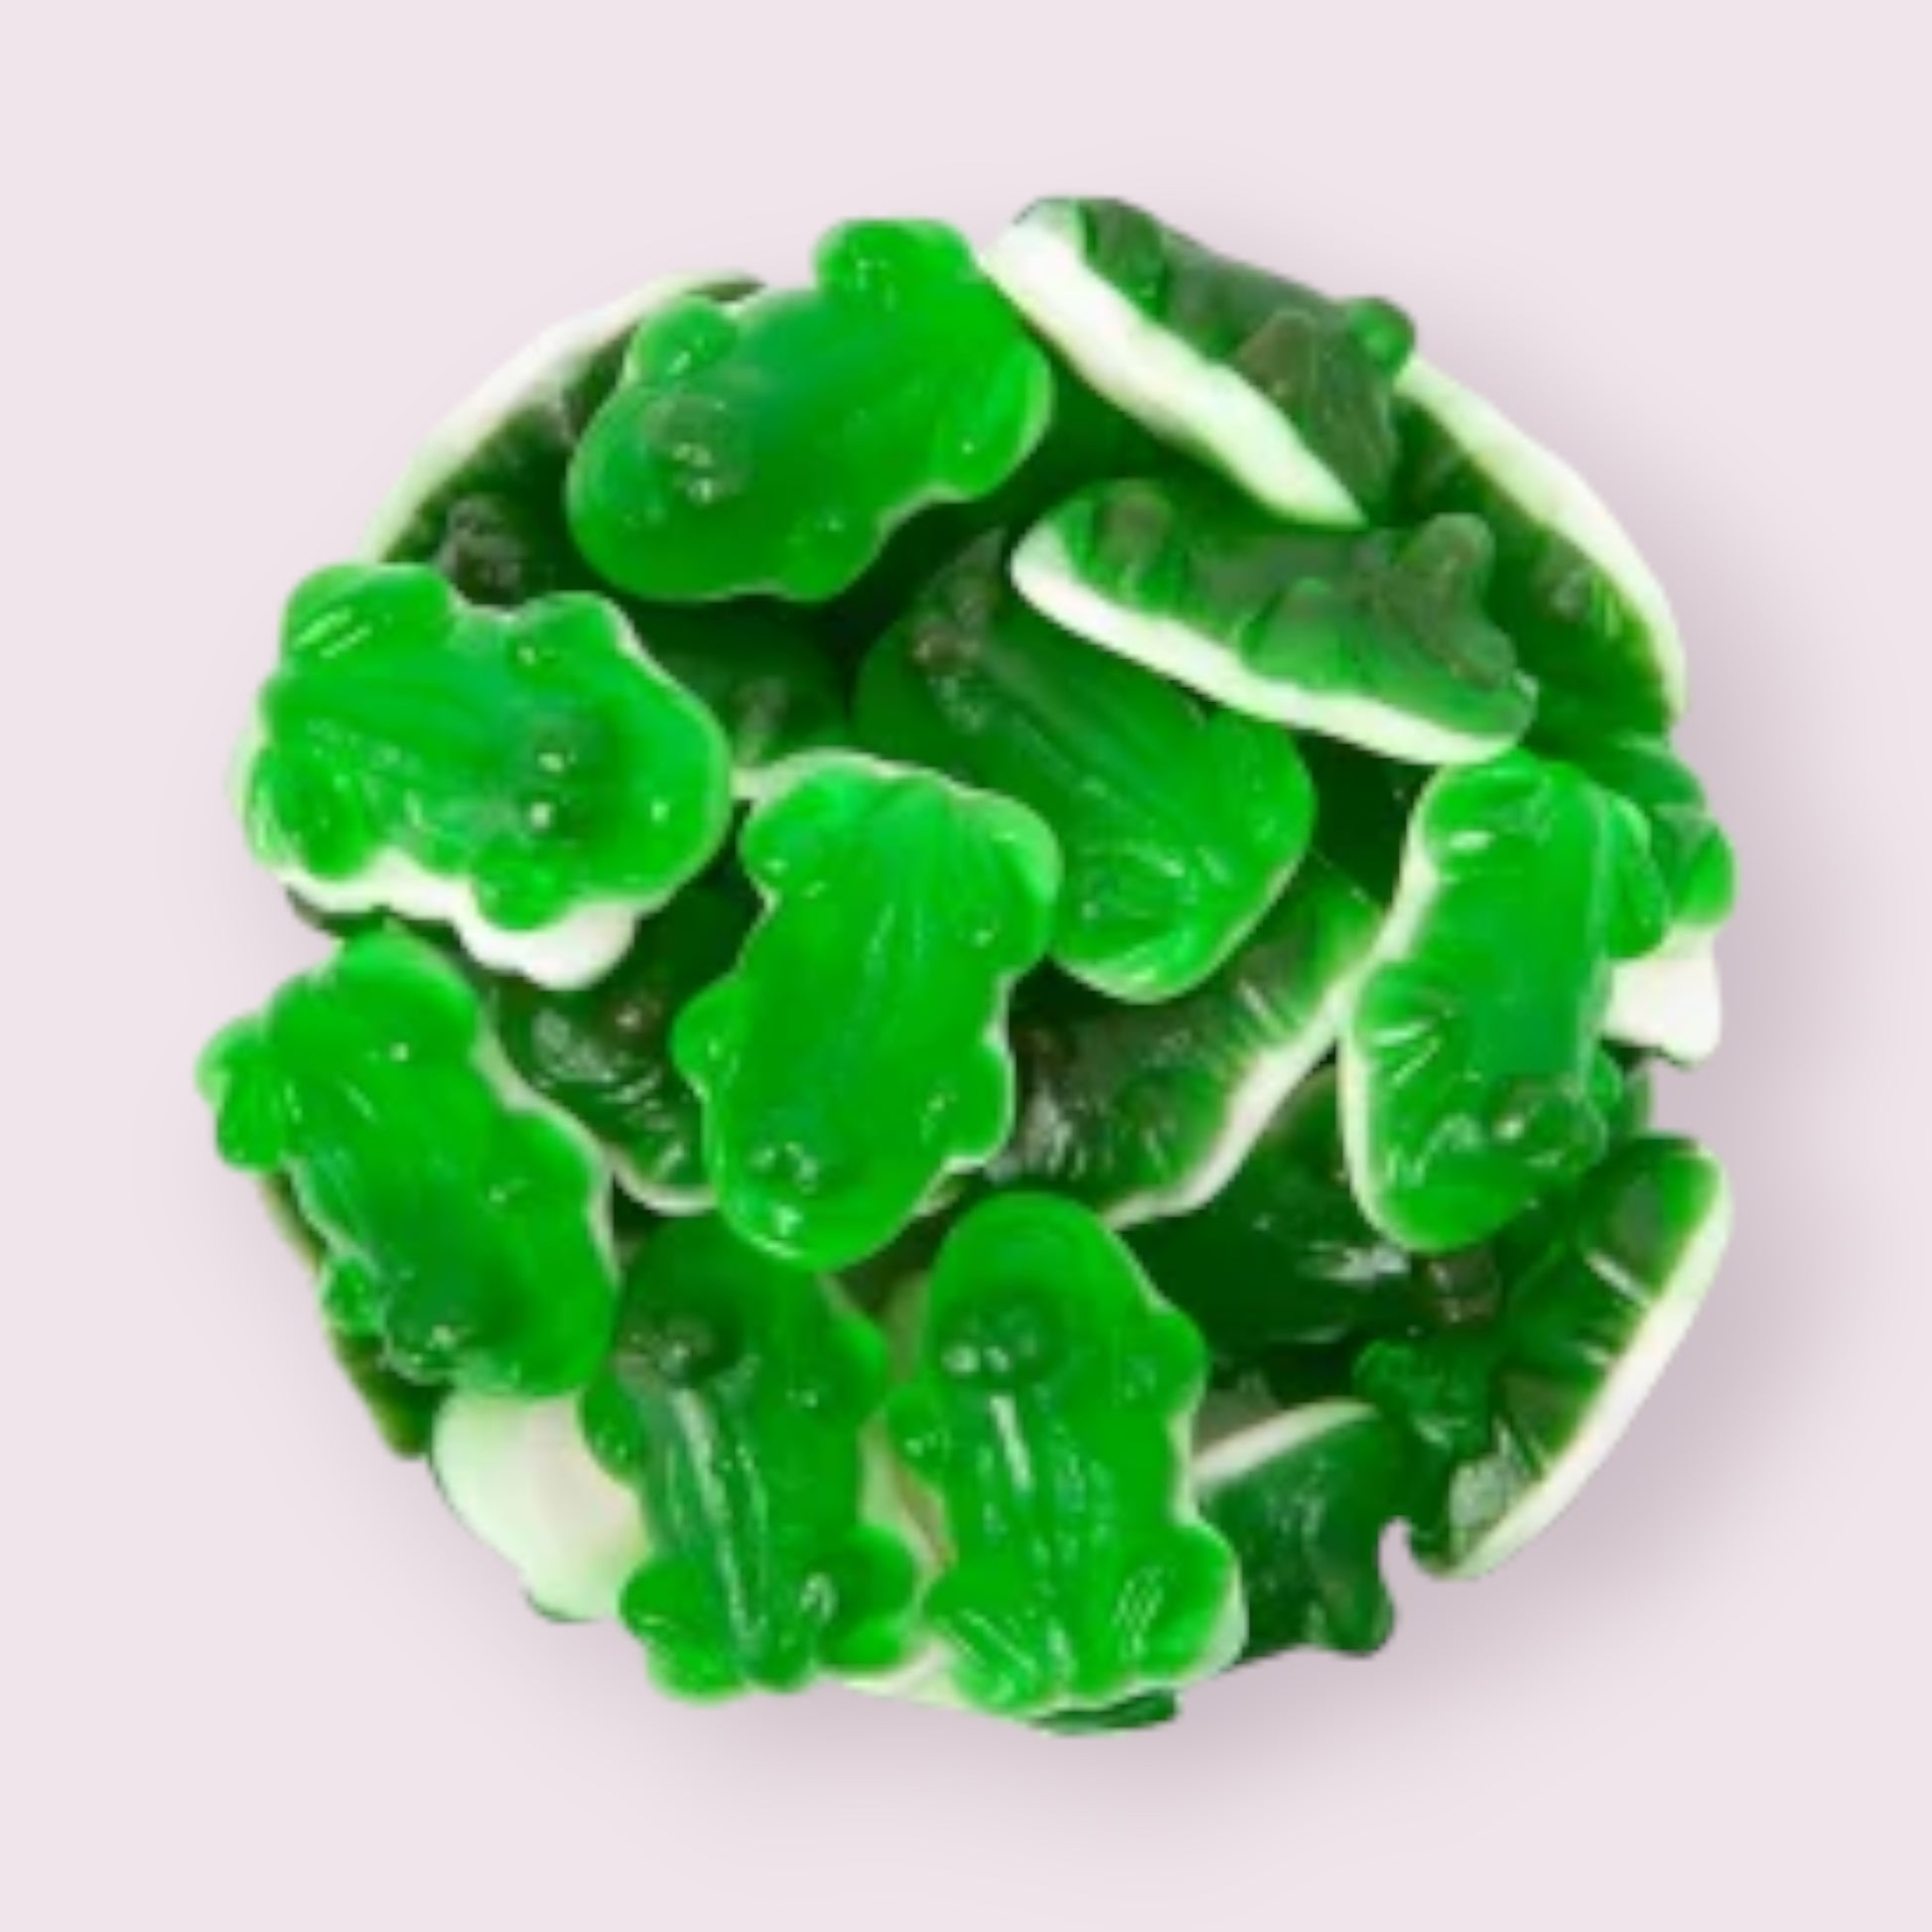 Gummy Frogs, Green Frogs, Frog Gummies, Bulk Candy, Loose Candy